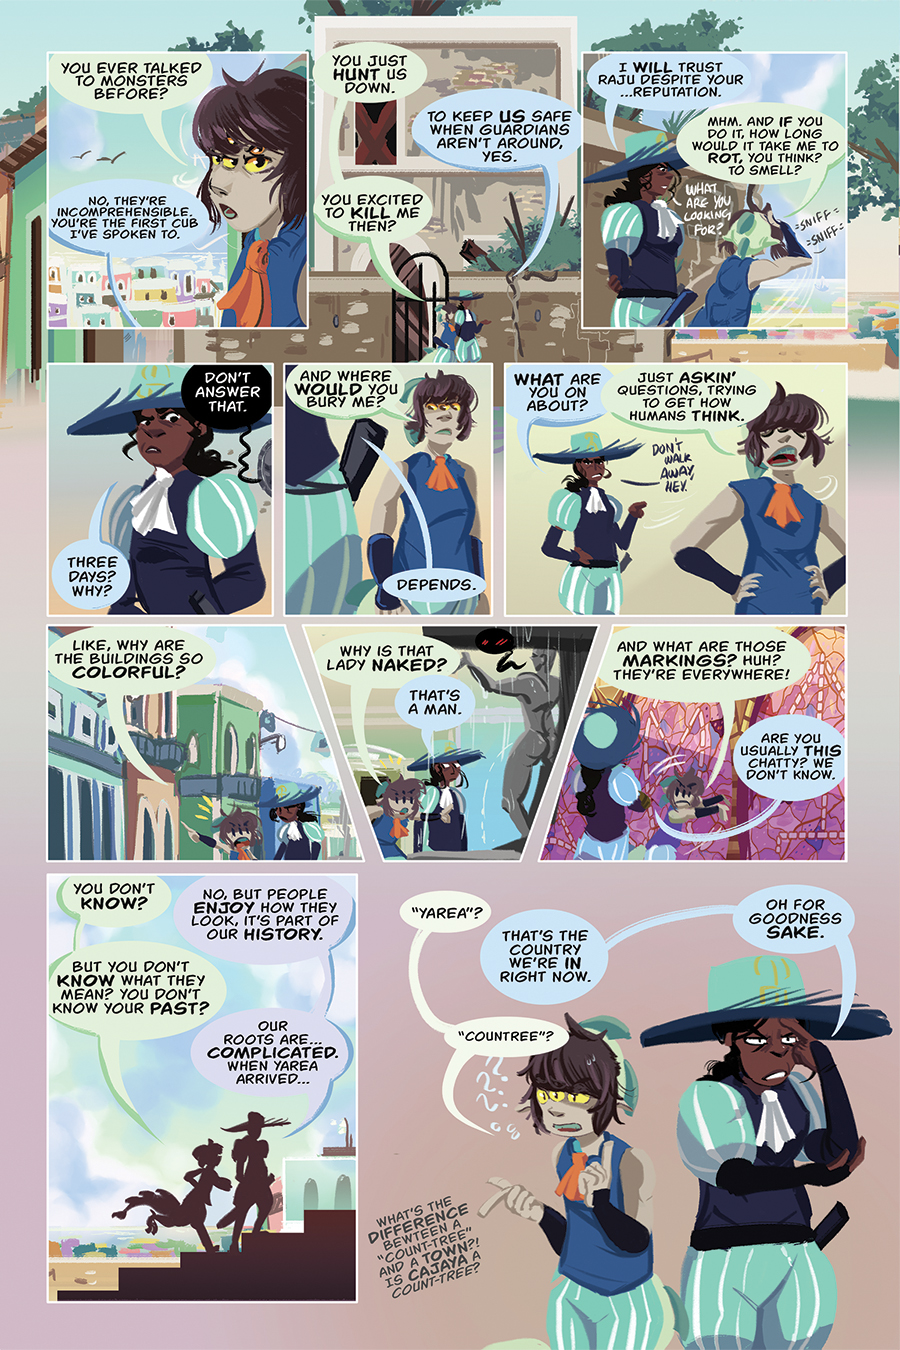 Chapter 8, page 7